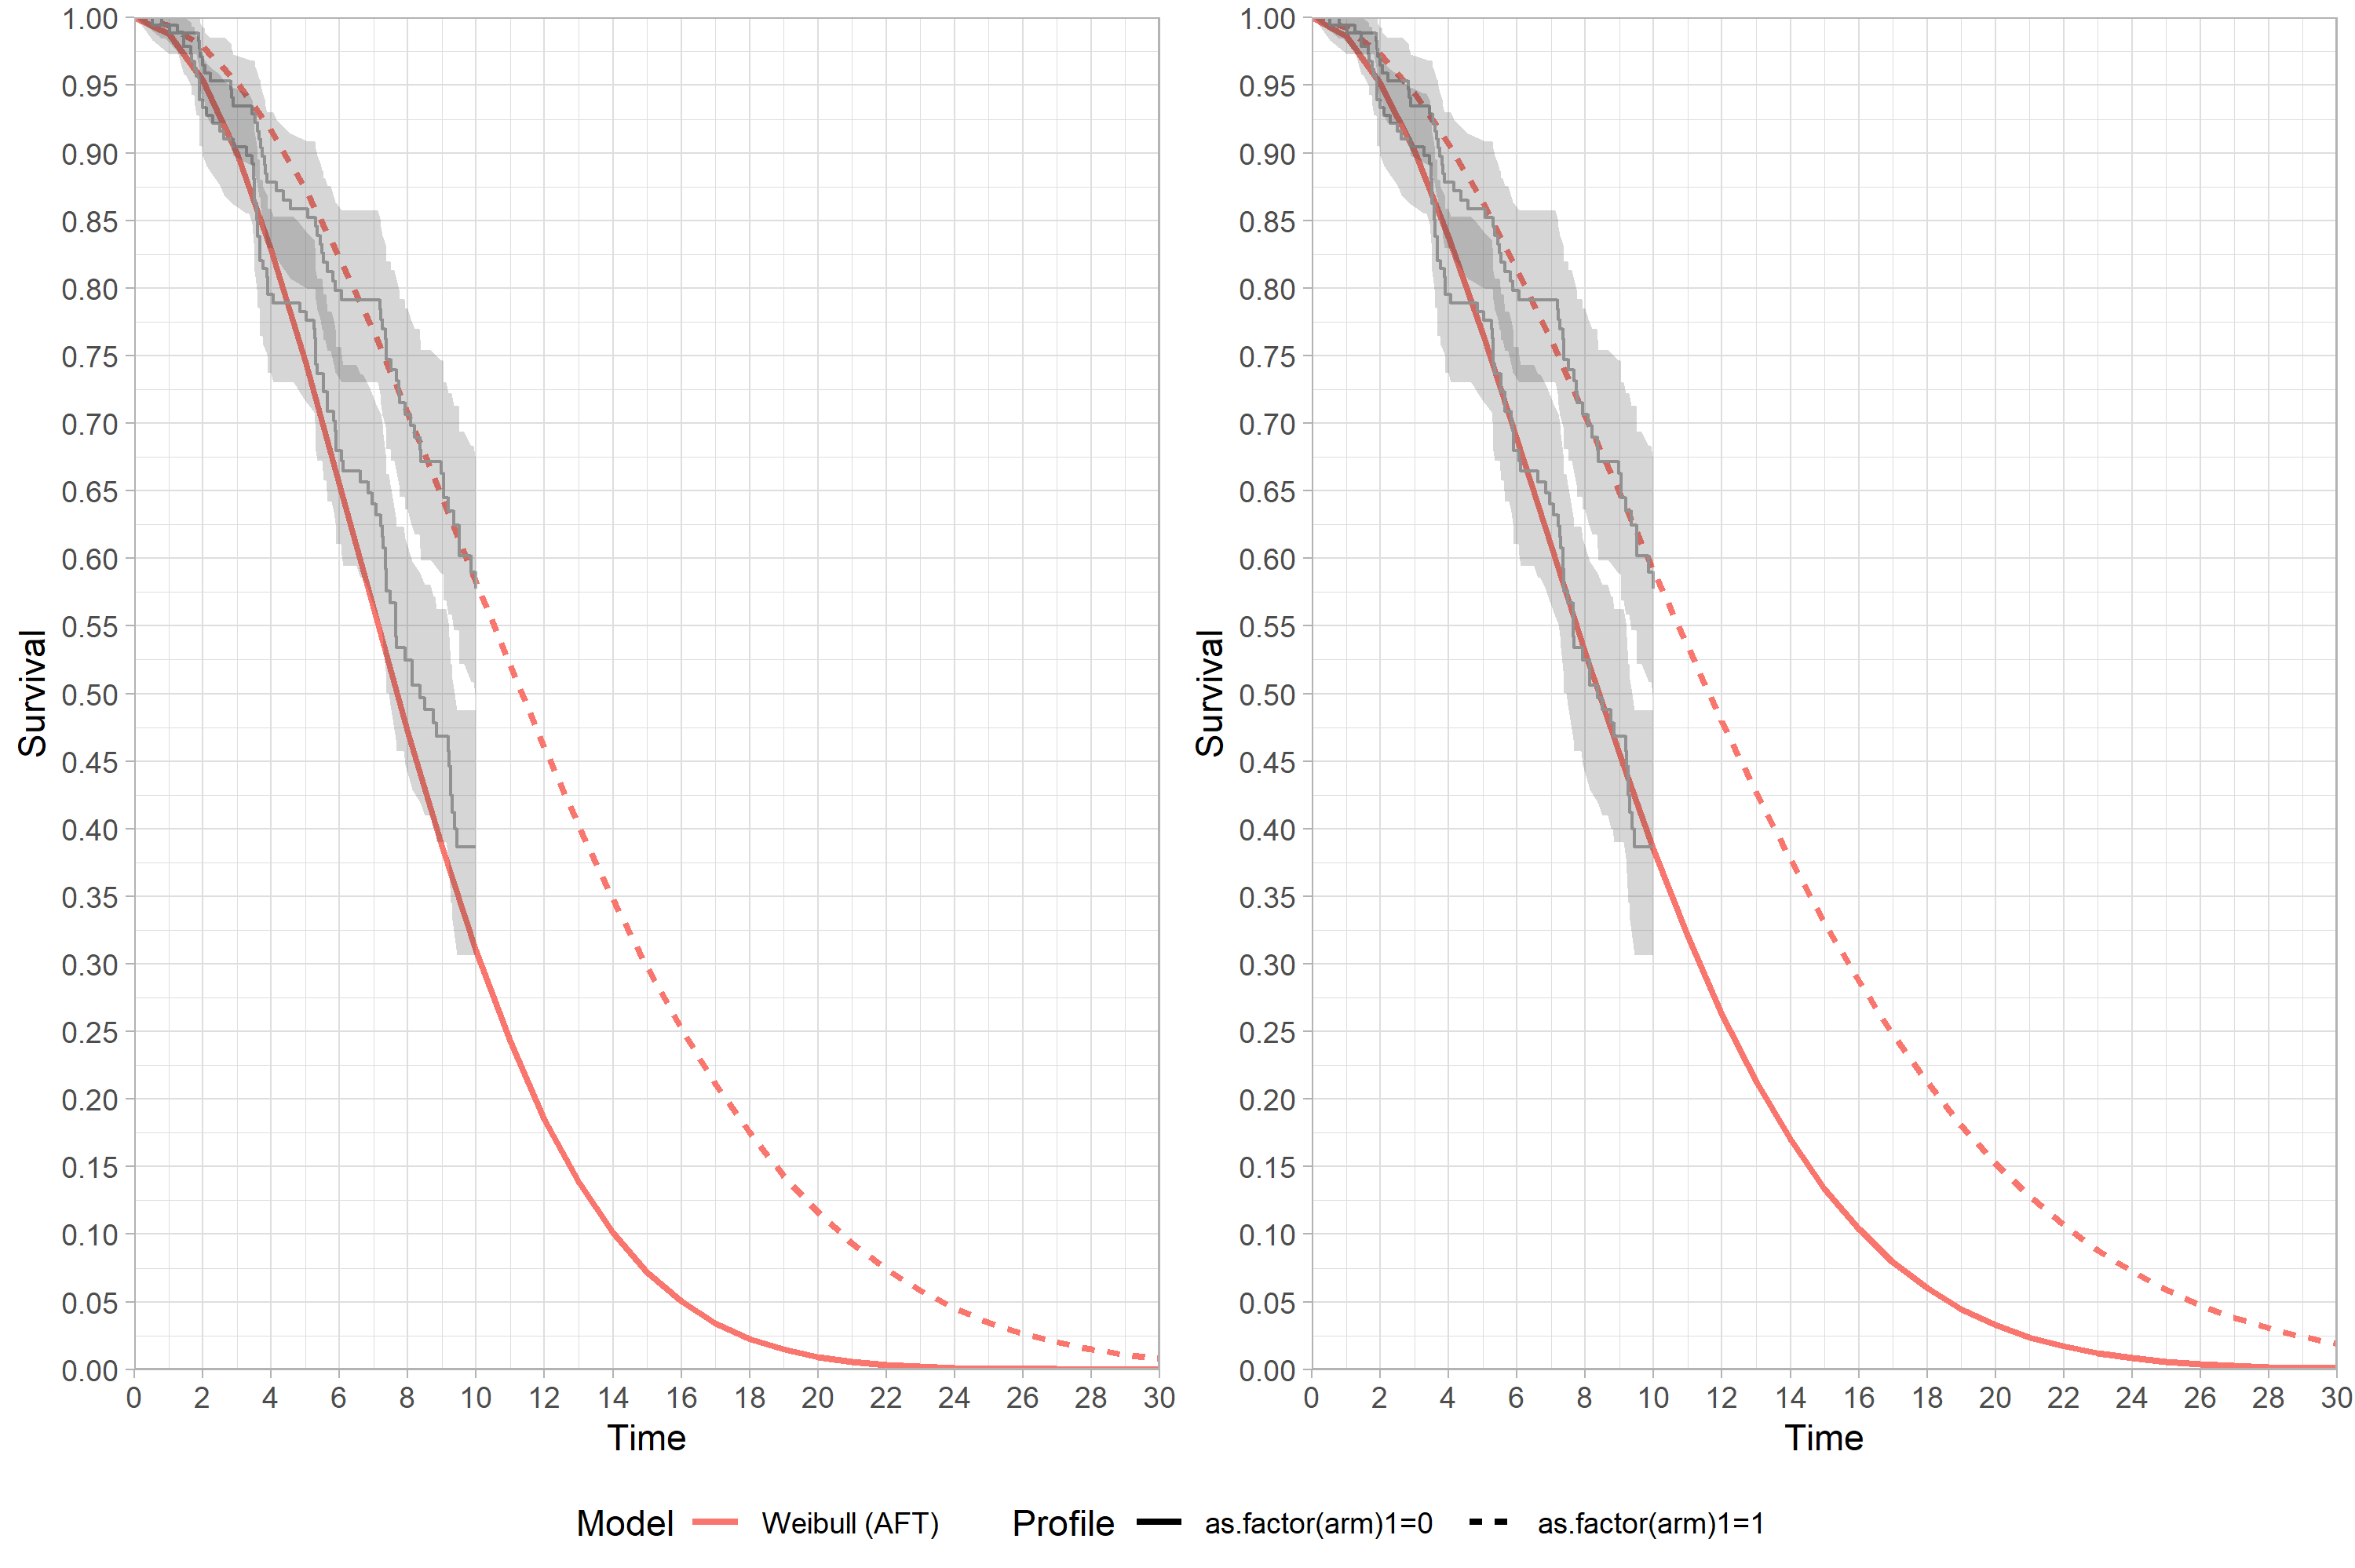 Survival function with Expert prior (left) and Vague prior (right)